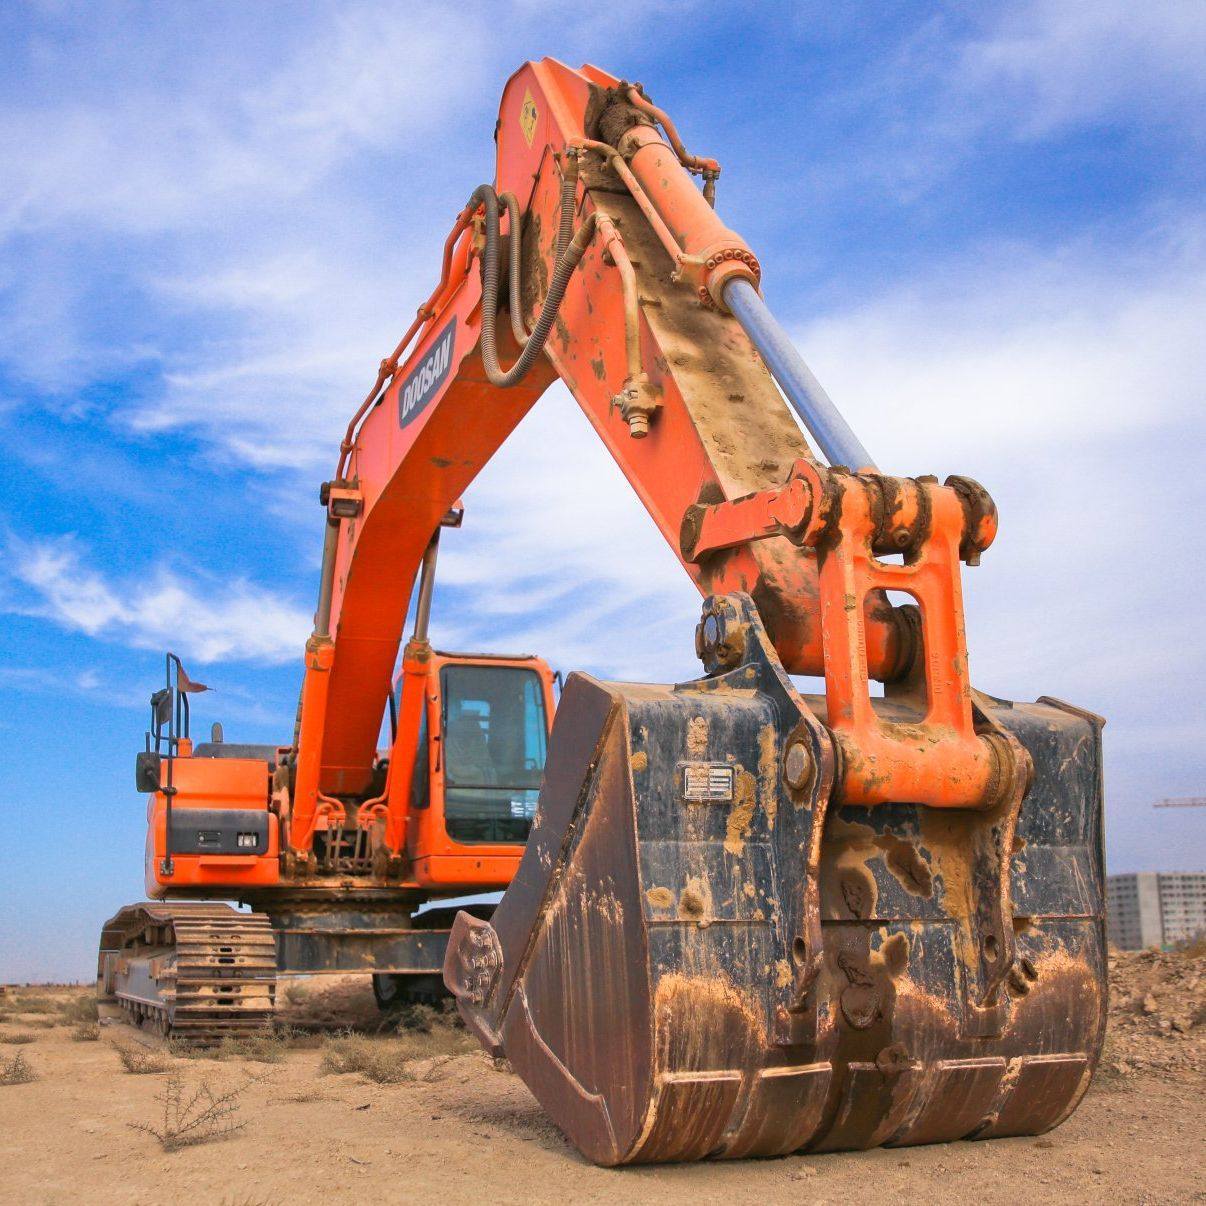 An orange excavator with the word doosan on the side